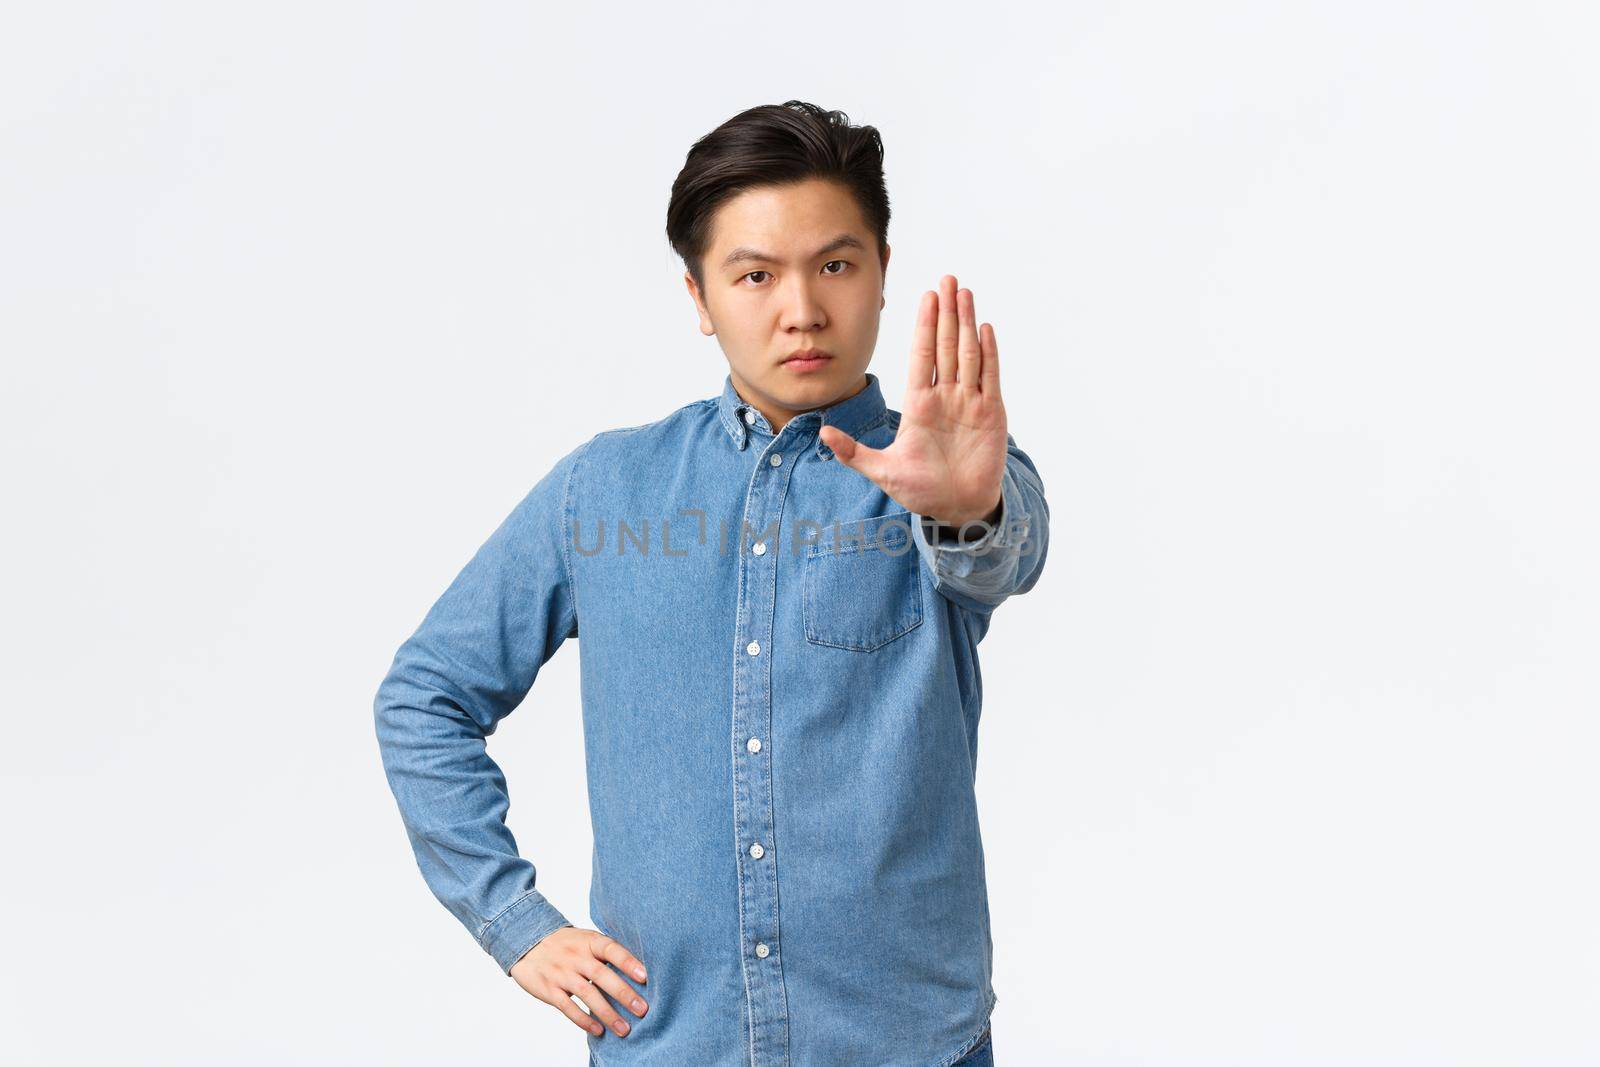 Serious strict asian man extending hand to shop stop gesture, scolding person or disagree, prohibit action, forbid doing something bad, standing over white background and give warning.